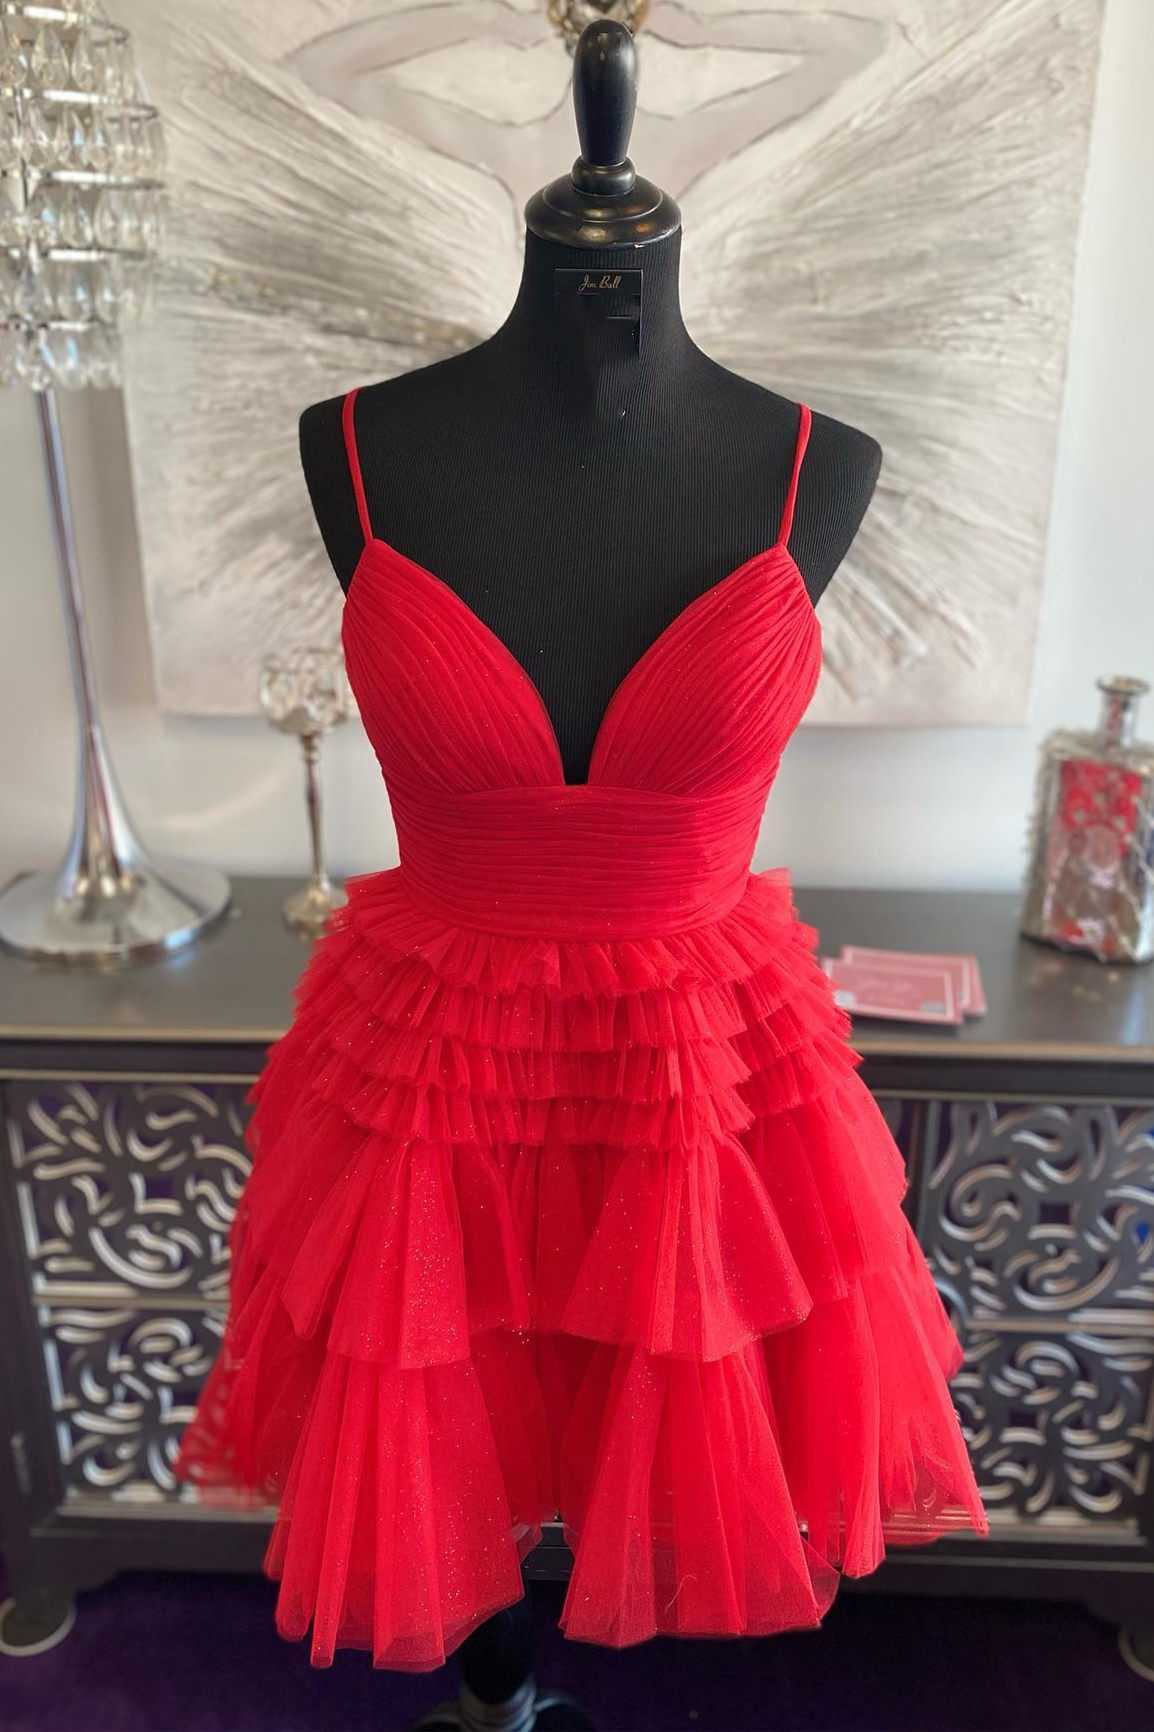 Multi-Tiered V-Neck Backless A-Line Short Party Dress,A-line Homecoming Dress Y2350